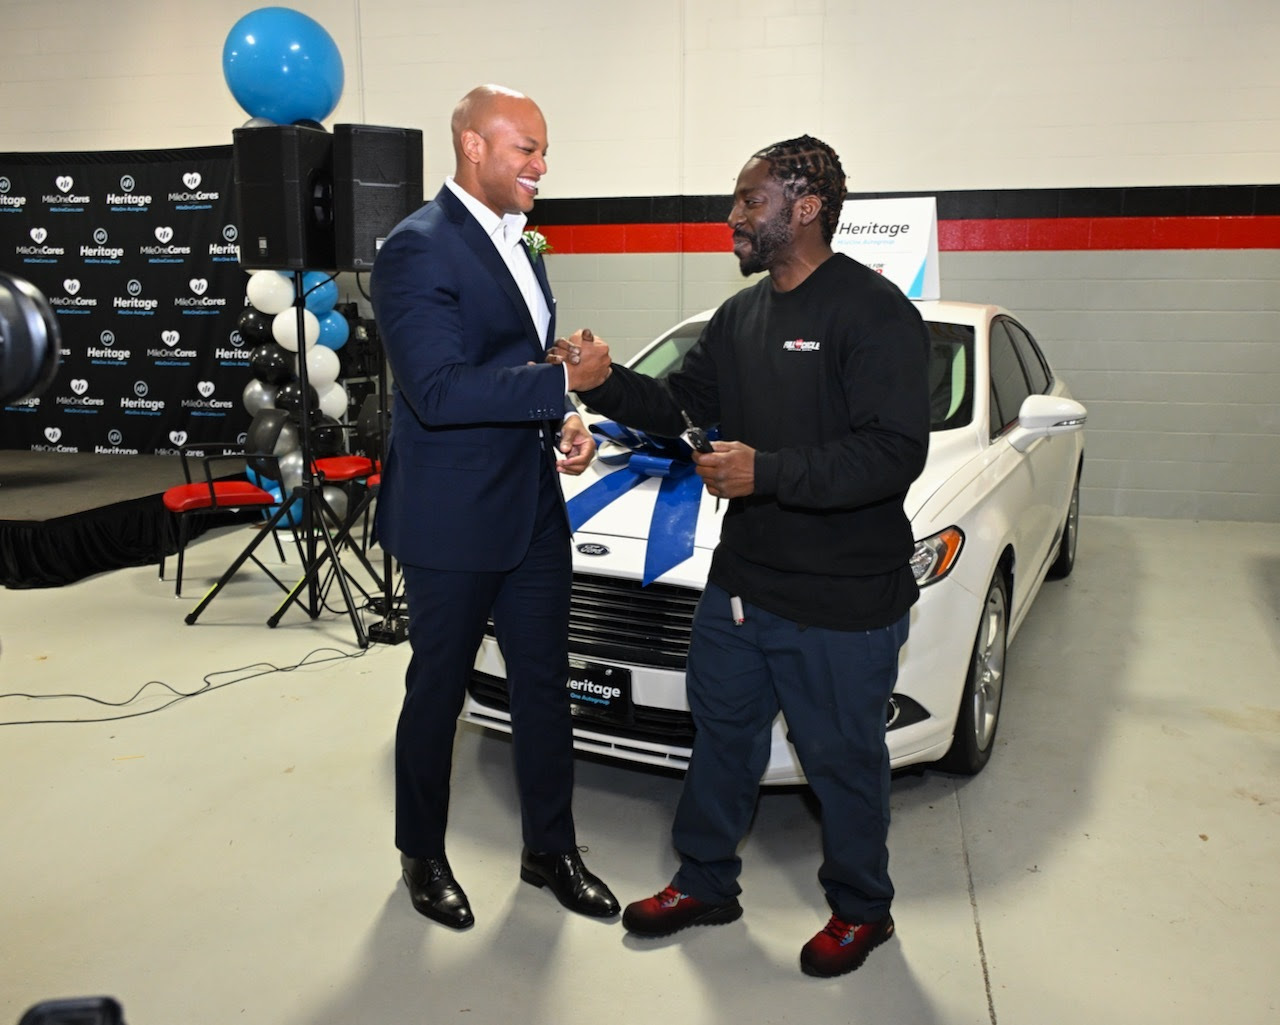 Governor Moore celebrates a new vehicle presented to a Maryland veteran at the Vehicles for Change event in Owings Mills.